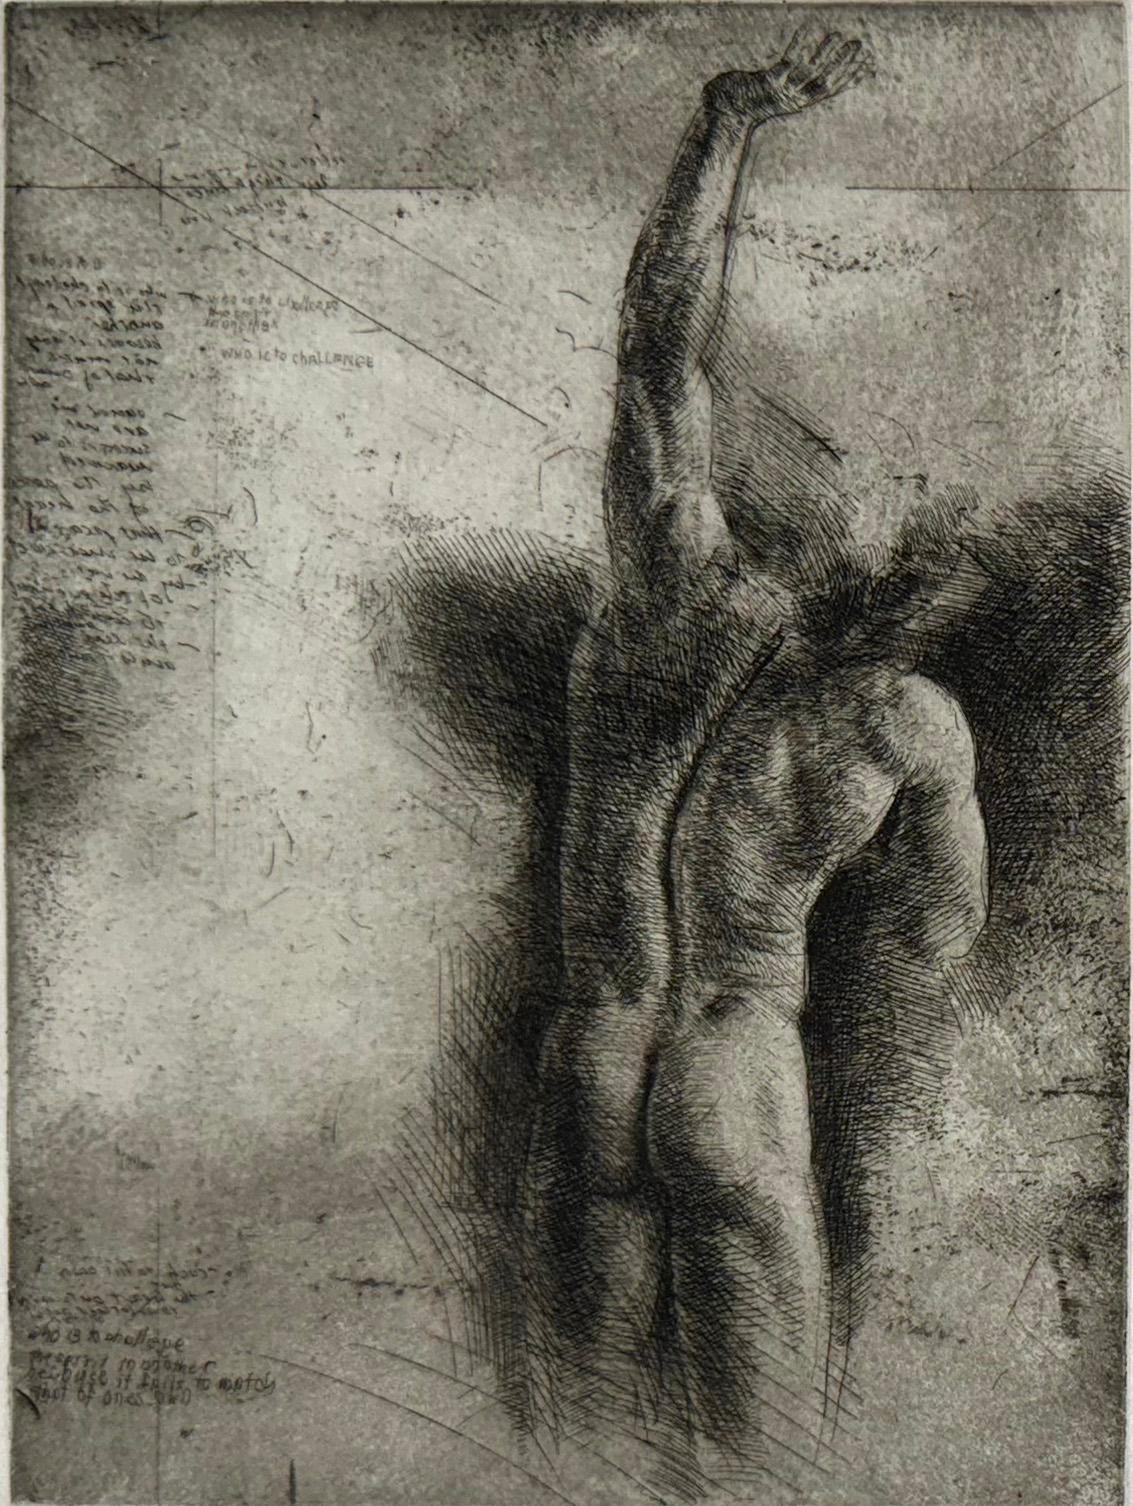 Signed, titled and numbered by the artist from an edition of 100. Male nude etching by Trevor Southey.  

Trevor Southey was born in Rhodesia, Africa (now Zimbabwe) in 1940. His African heritage can be traced to European colonists who settled in